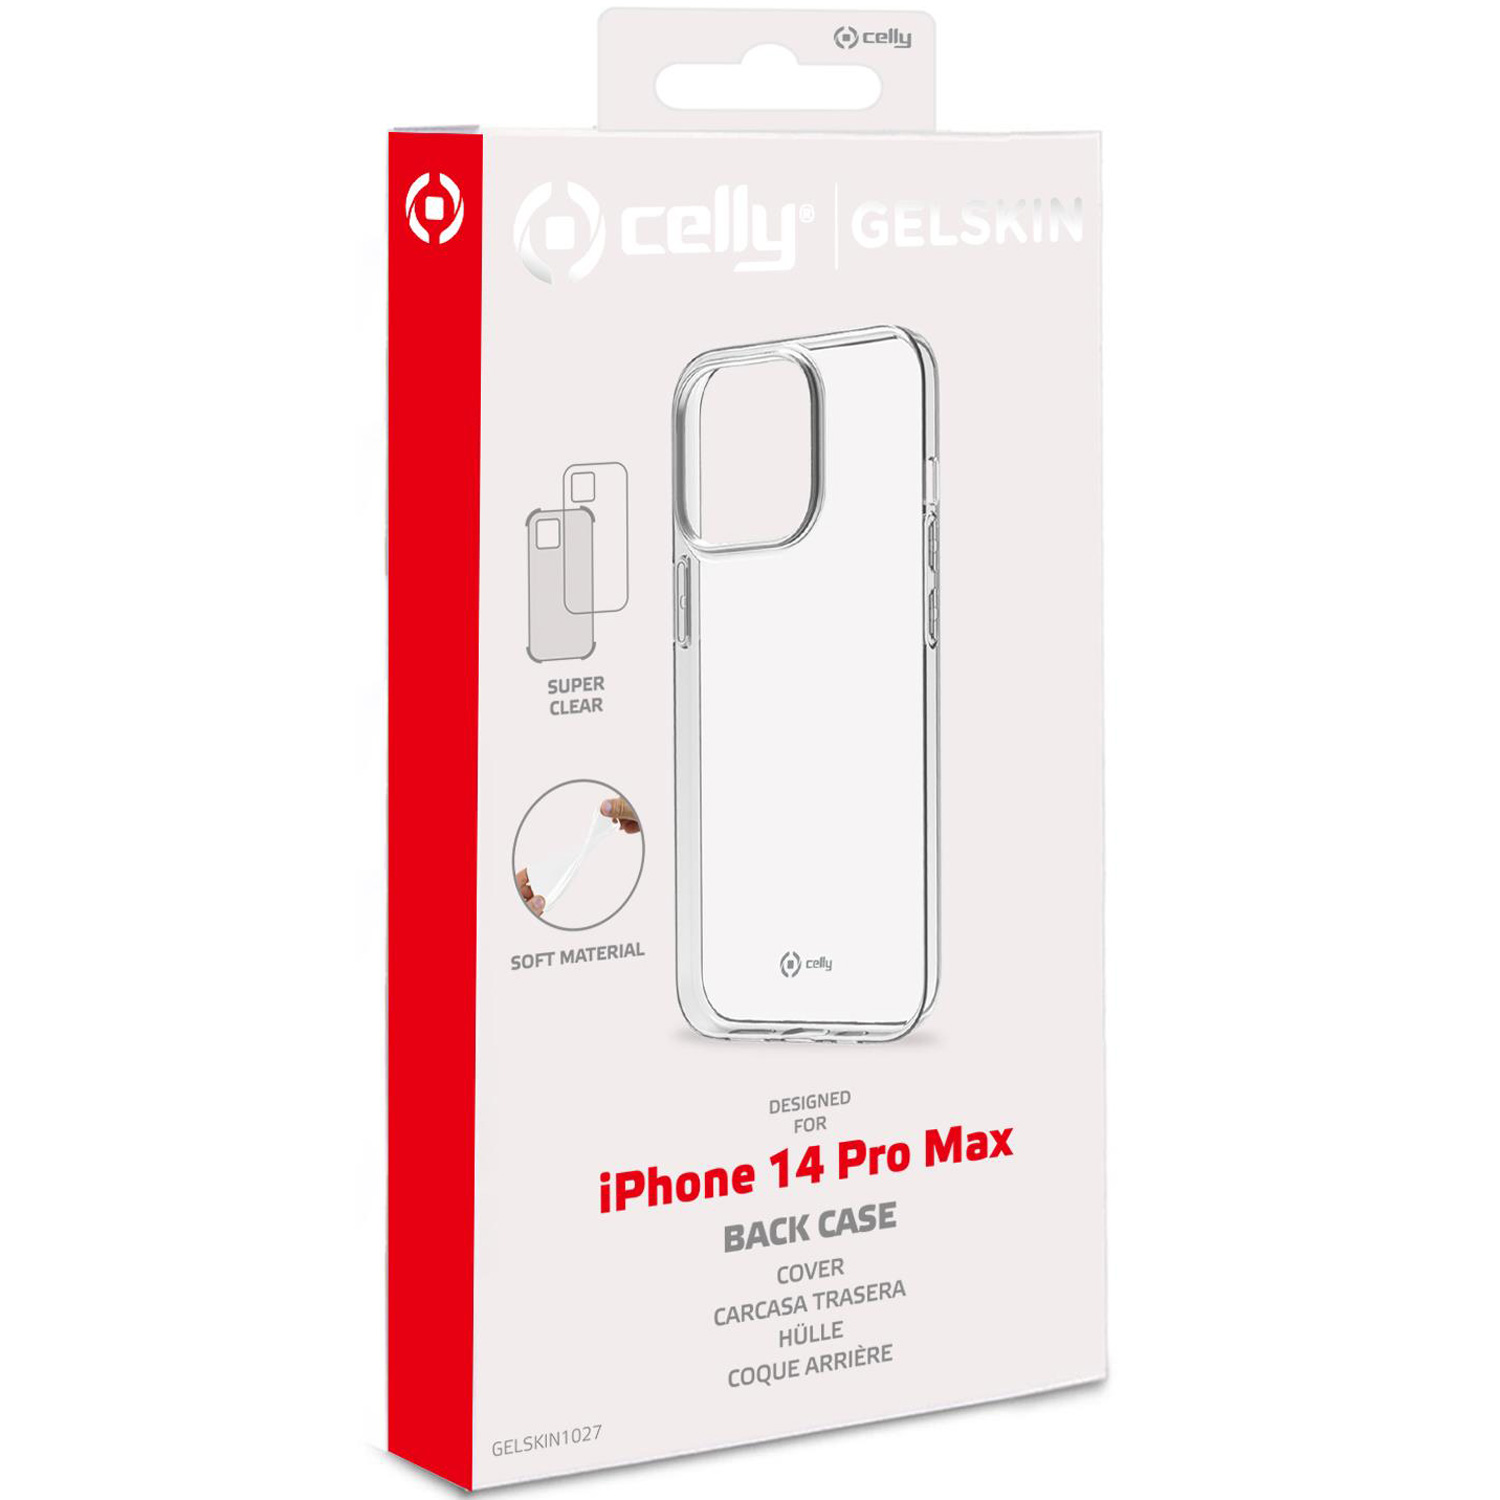 14 256446, Apple, transparent Pro iPhone CELLY Backcover, Max,